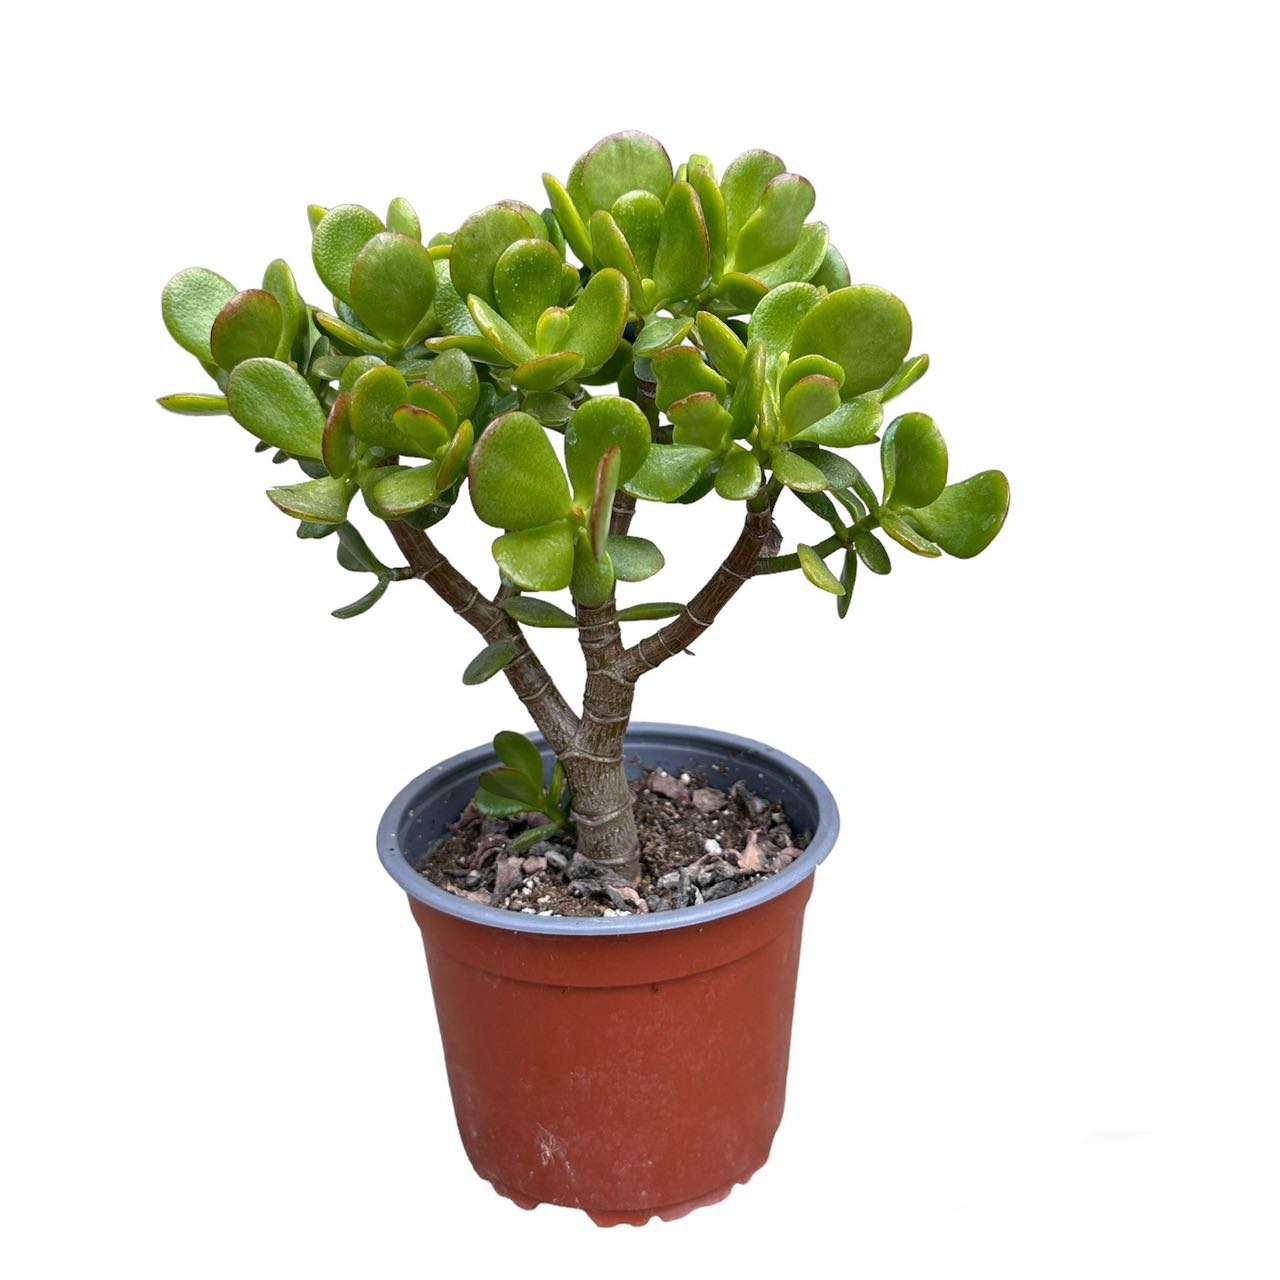 

6in Pot Big Jade Plant, 11"-13" Tall, Live/real Succulent Plant, Fully Rooted Large Succulents In 6" Plant Pot, Money Plants. Home Deco, Indoor, Outdoor